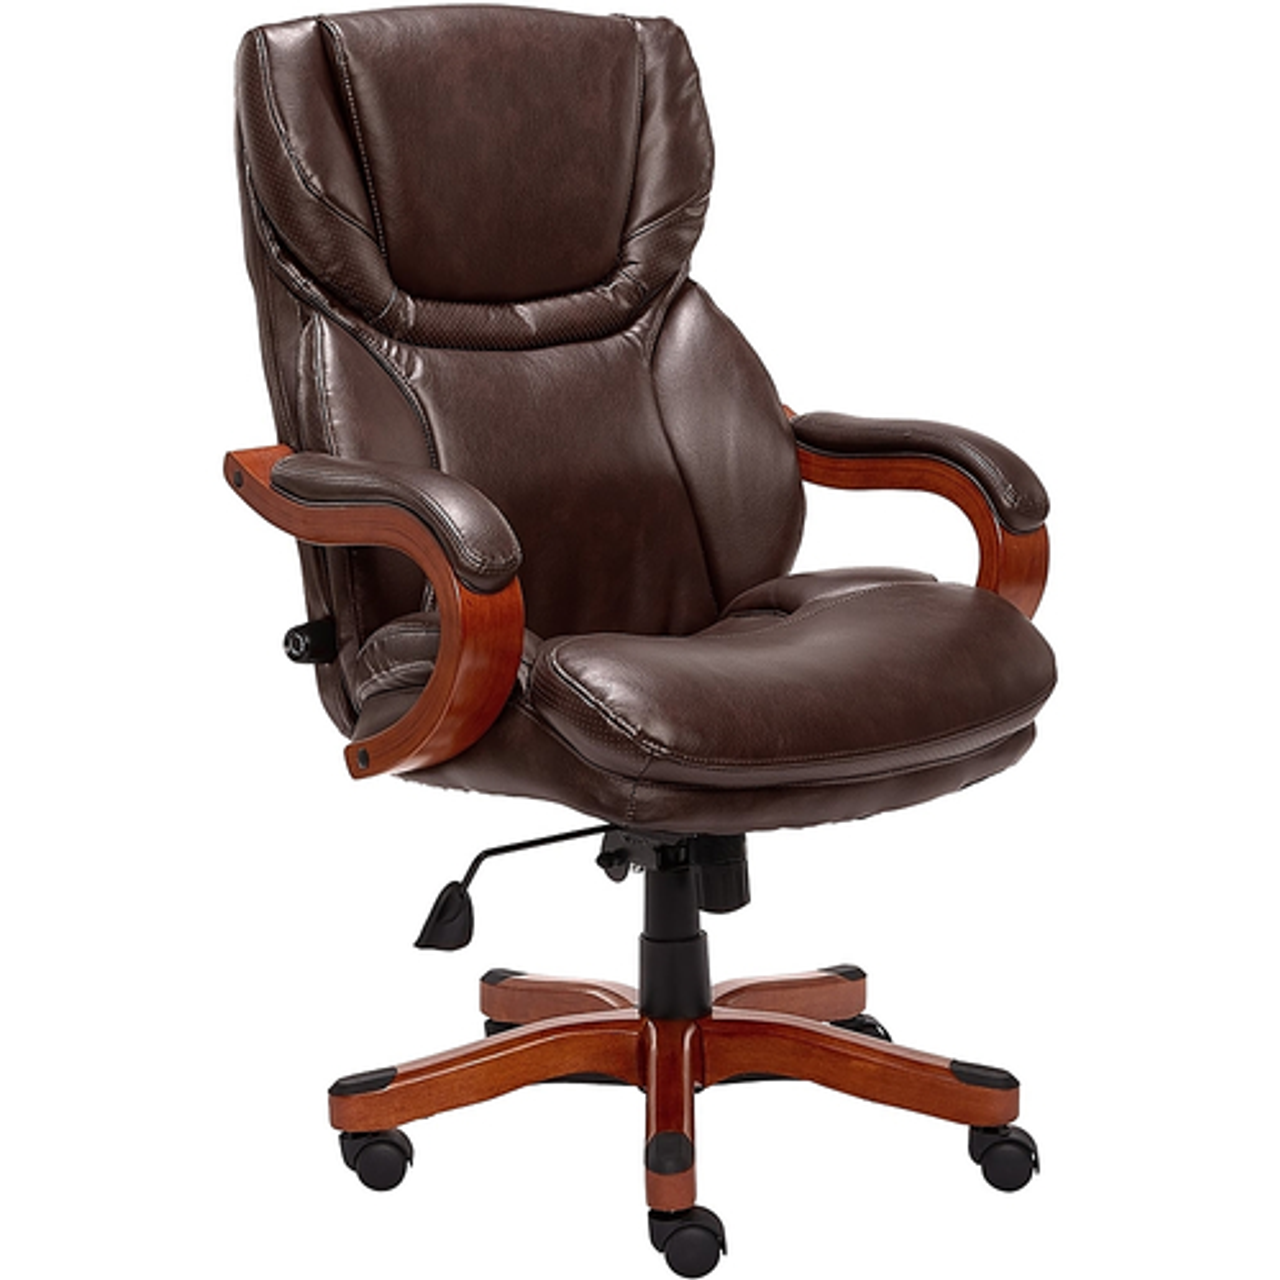 Serta - Big and Tall Bonded Leather Executive Chair - Biscuit